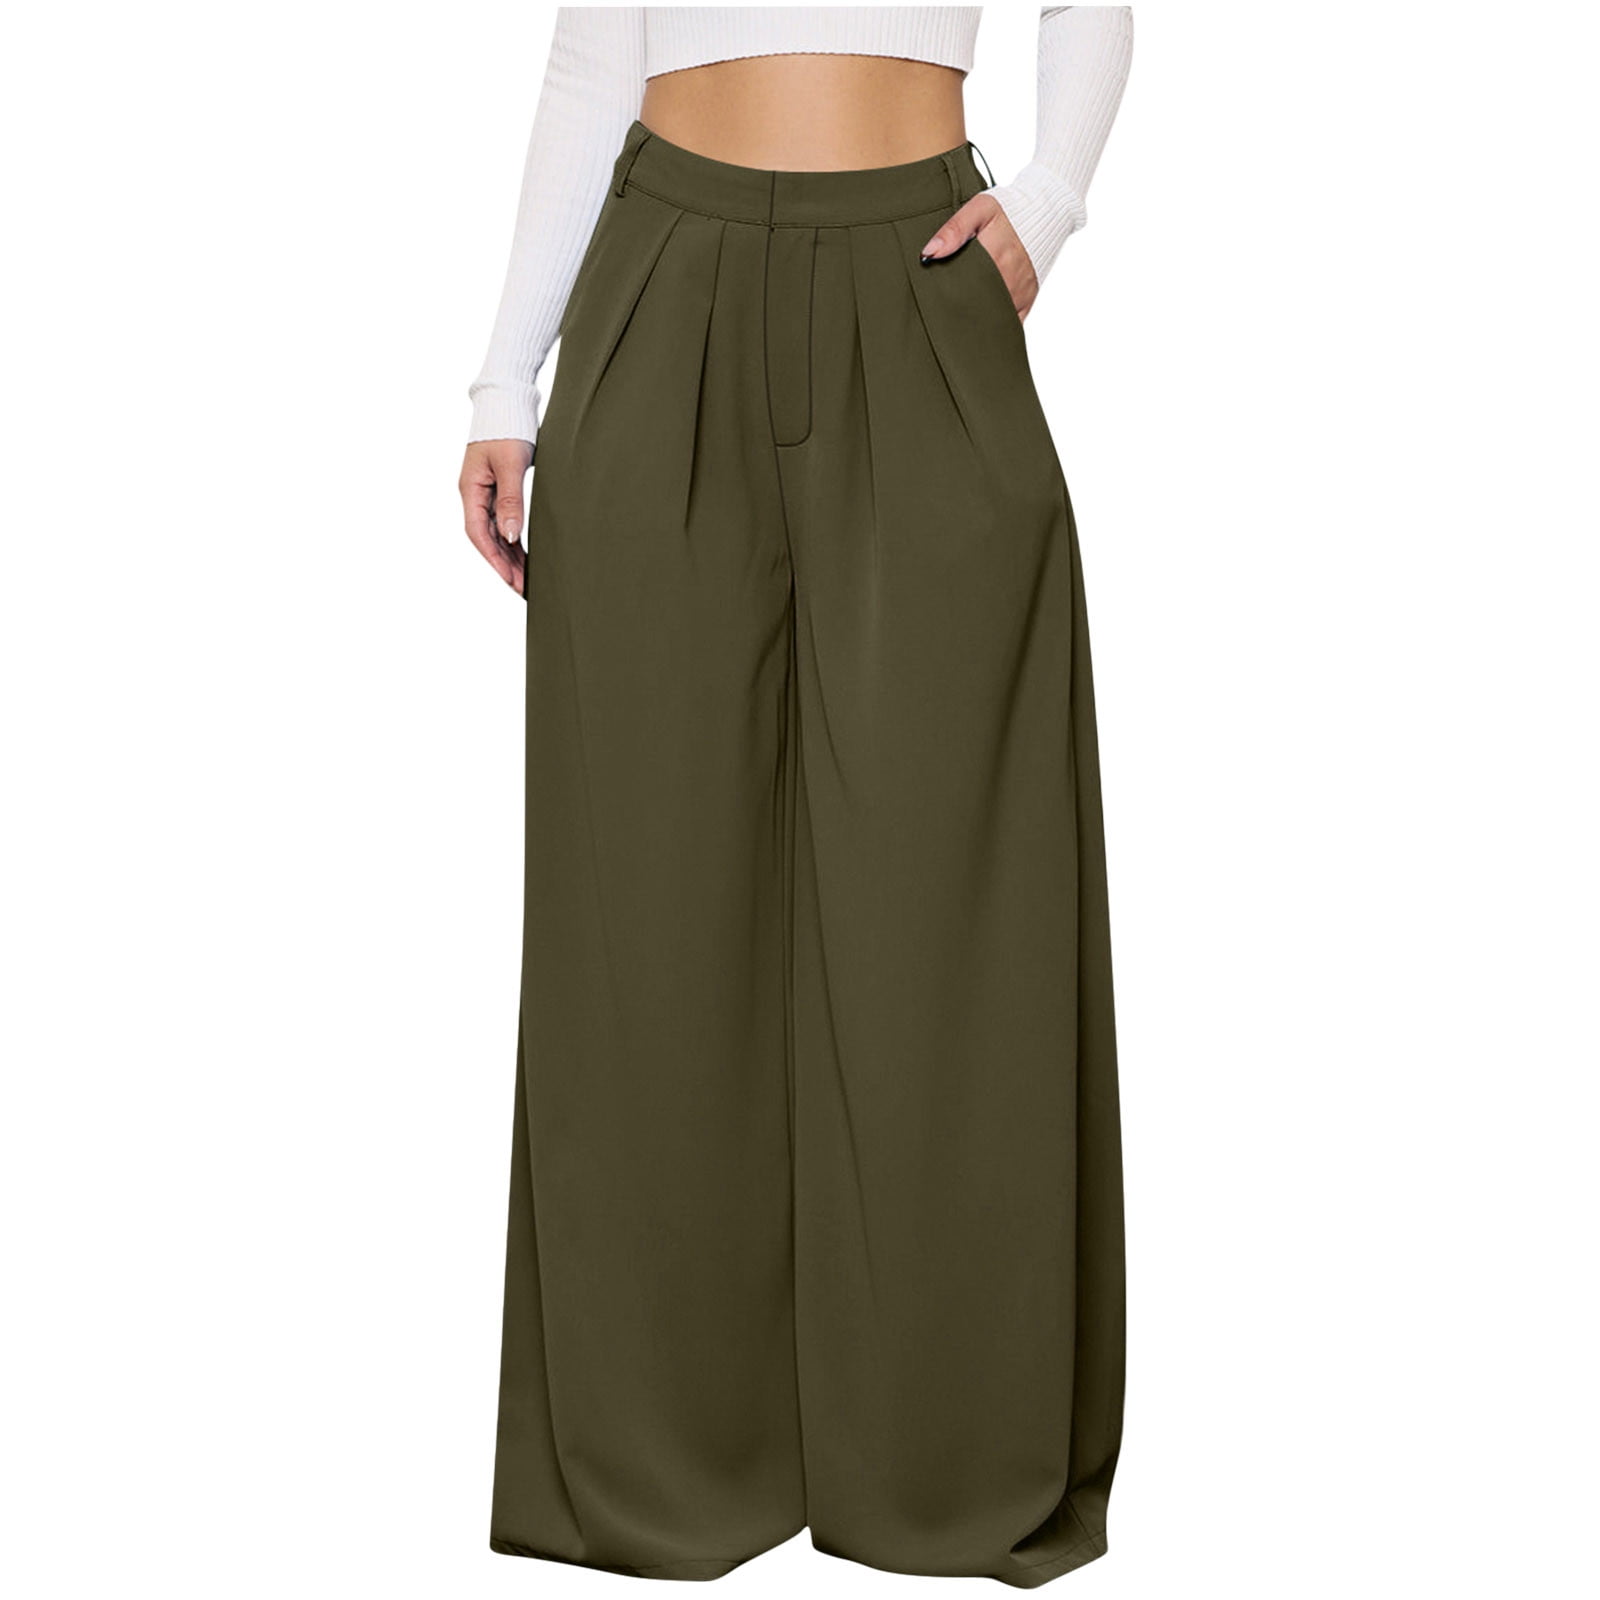 Lilgiuy Fashion Women Solid Buttons Cotton And Linen Casual Loose Trouser  Wide Leg Pants All Around Tummy Control Pants